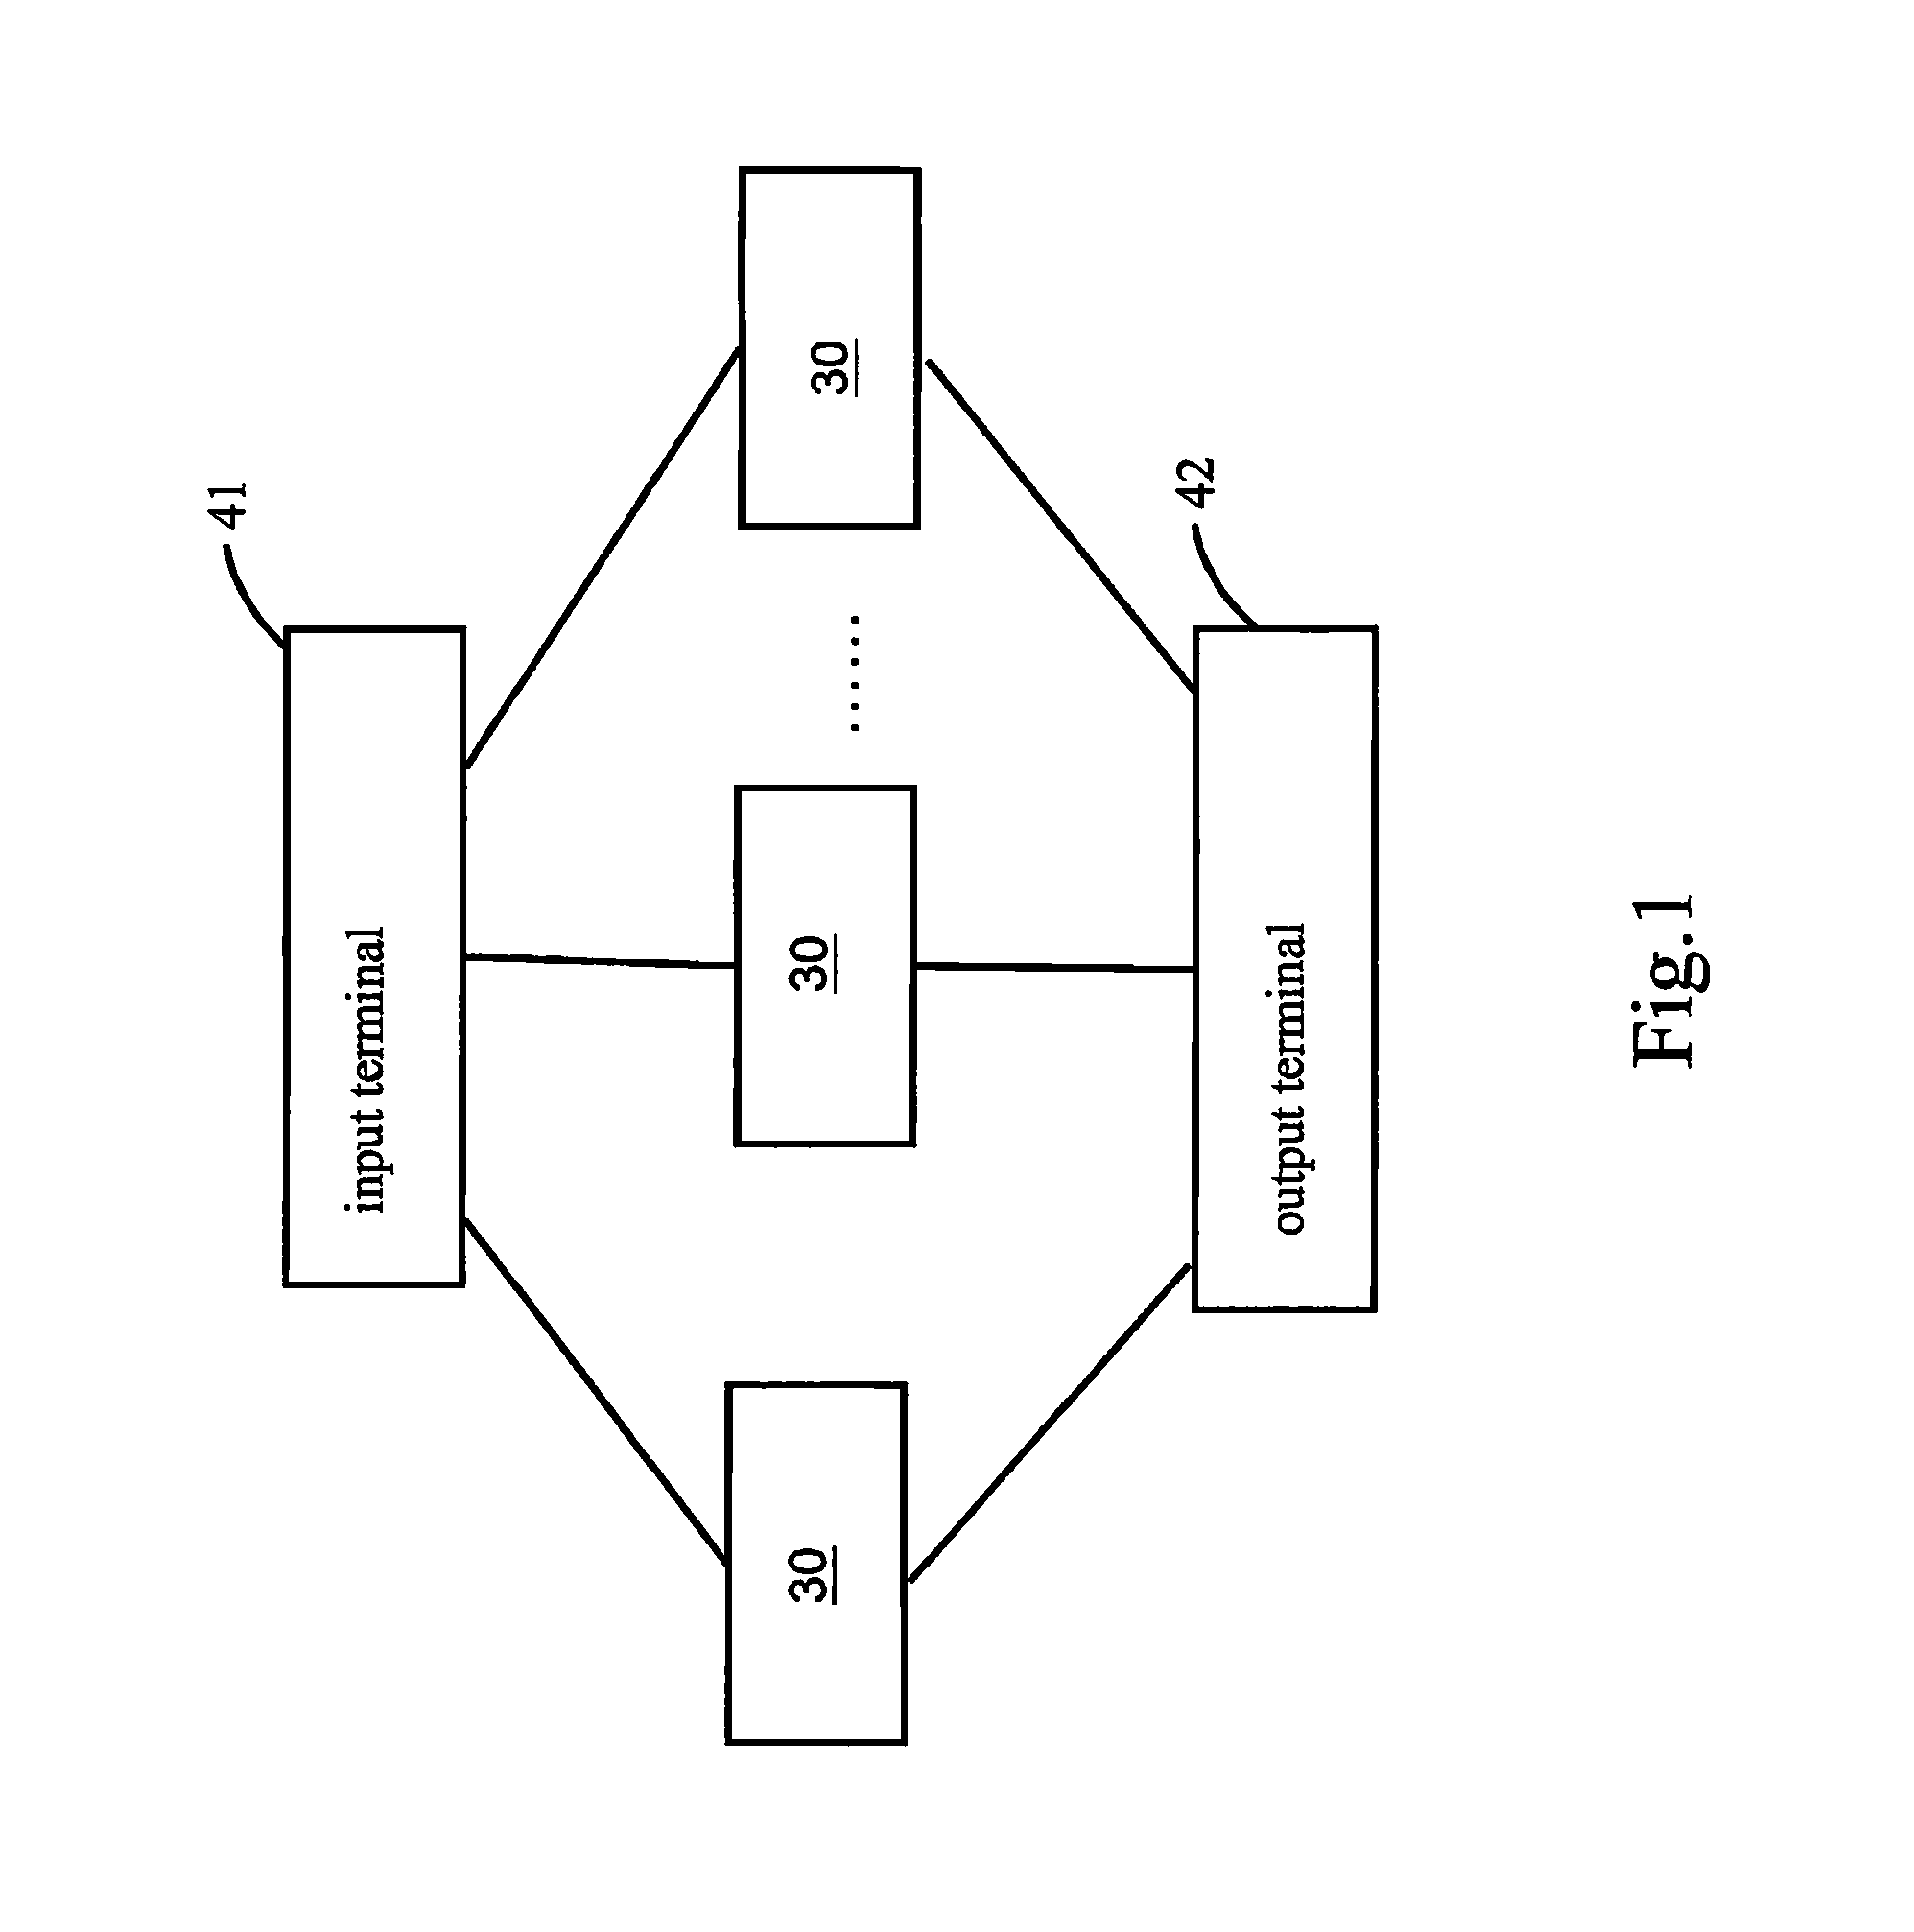 High electron mobility field effect transistor (HEMT) device